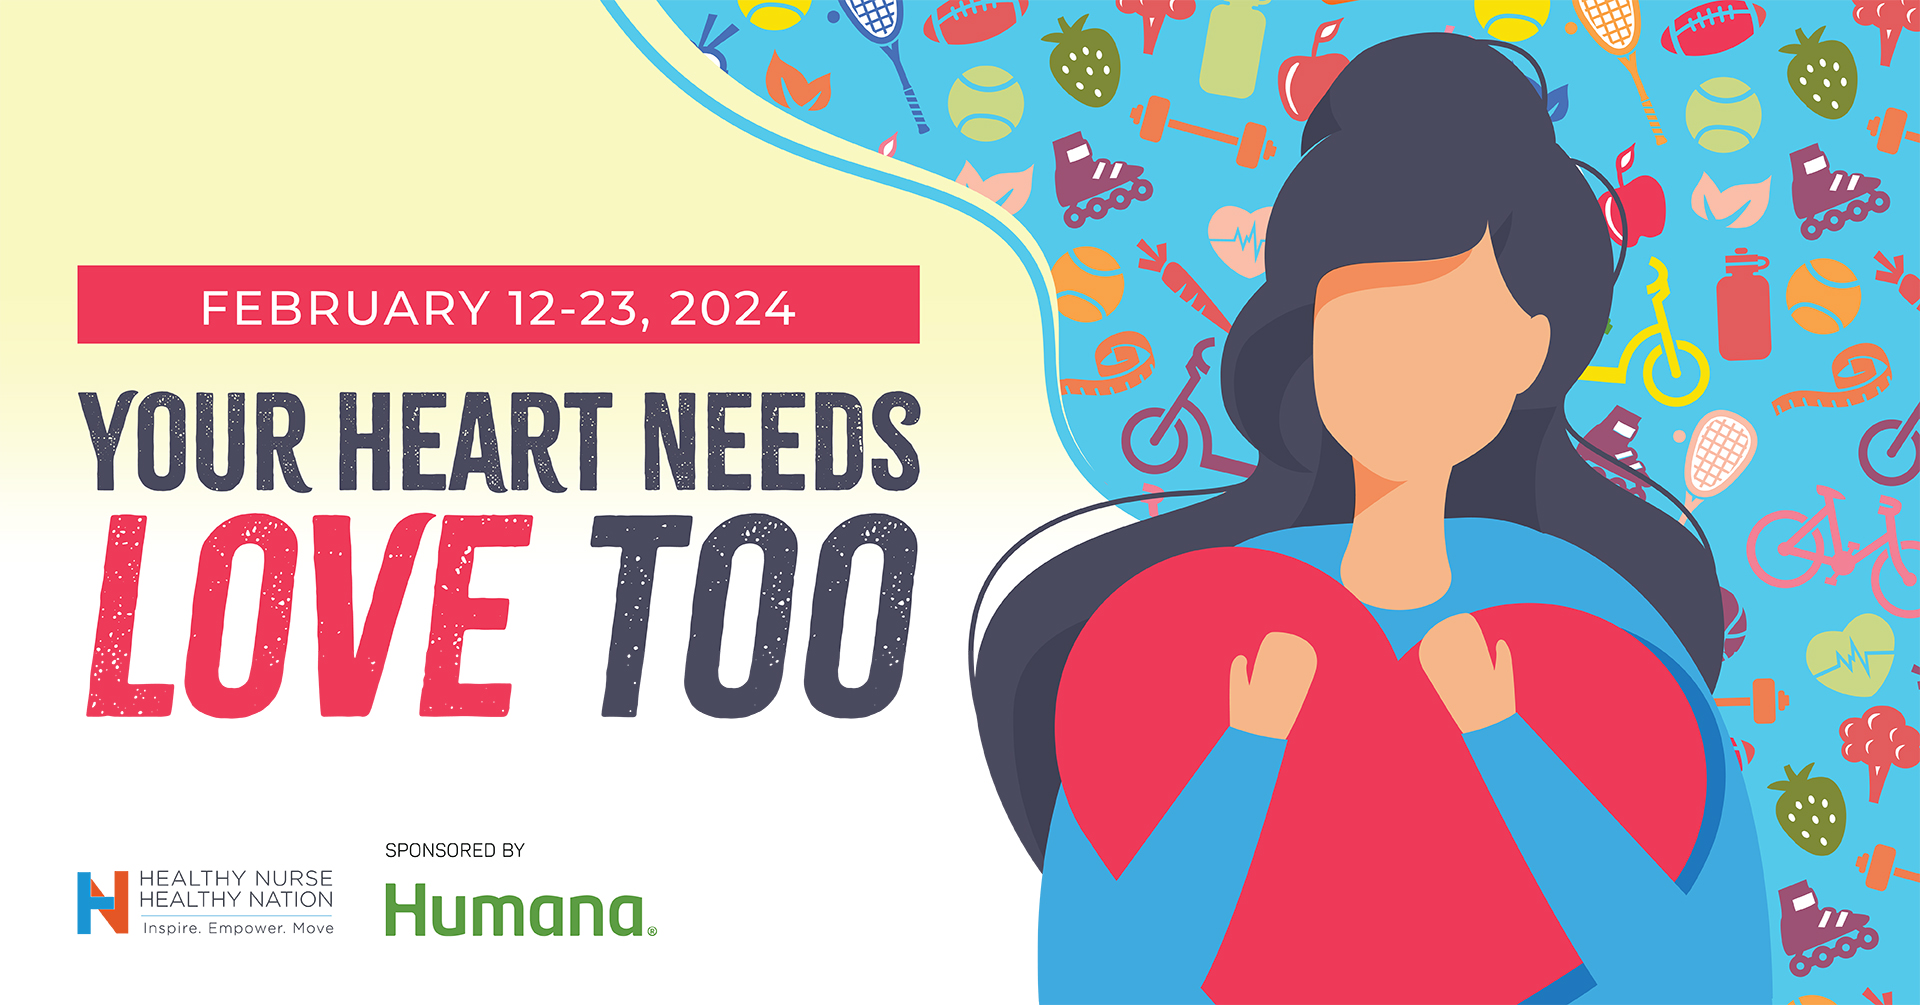 Power Up Your Heart - Healthy Nurse, Healthy Nation - Your Heart Needs Love Too Challenge, sponsored by Humana - Day 7 4671